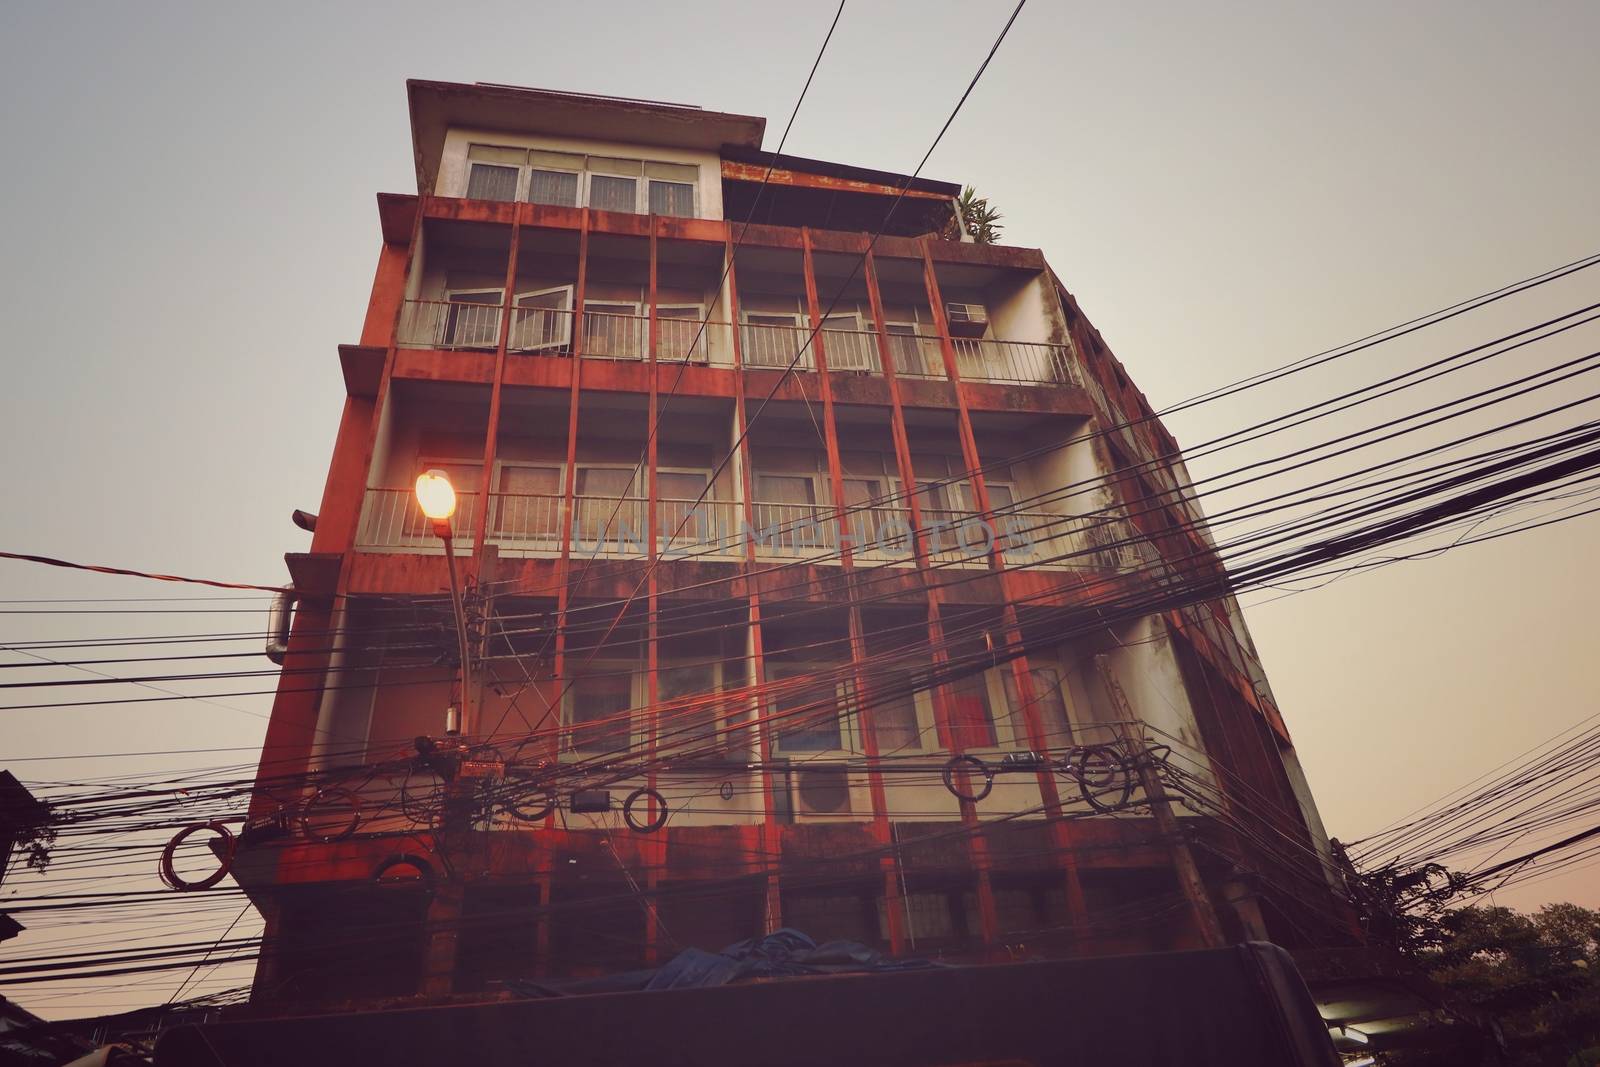 Rustic abandoned building in Yaowarat Street or Bangkok Chinatown, considered a heritage site by UNESCO which shows the culture and history of Chinese community in Thailand